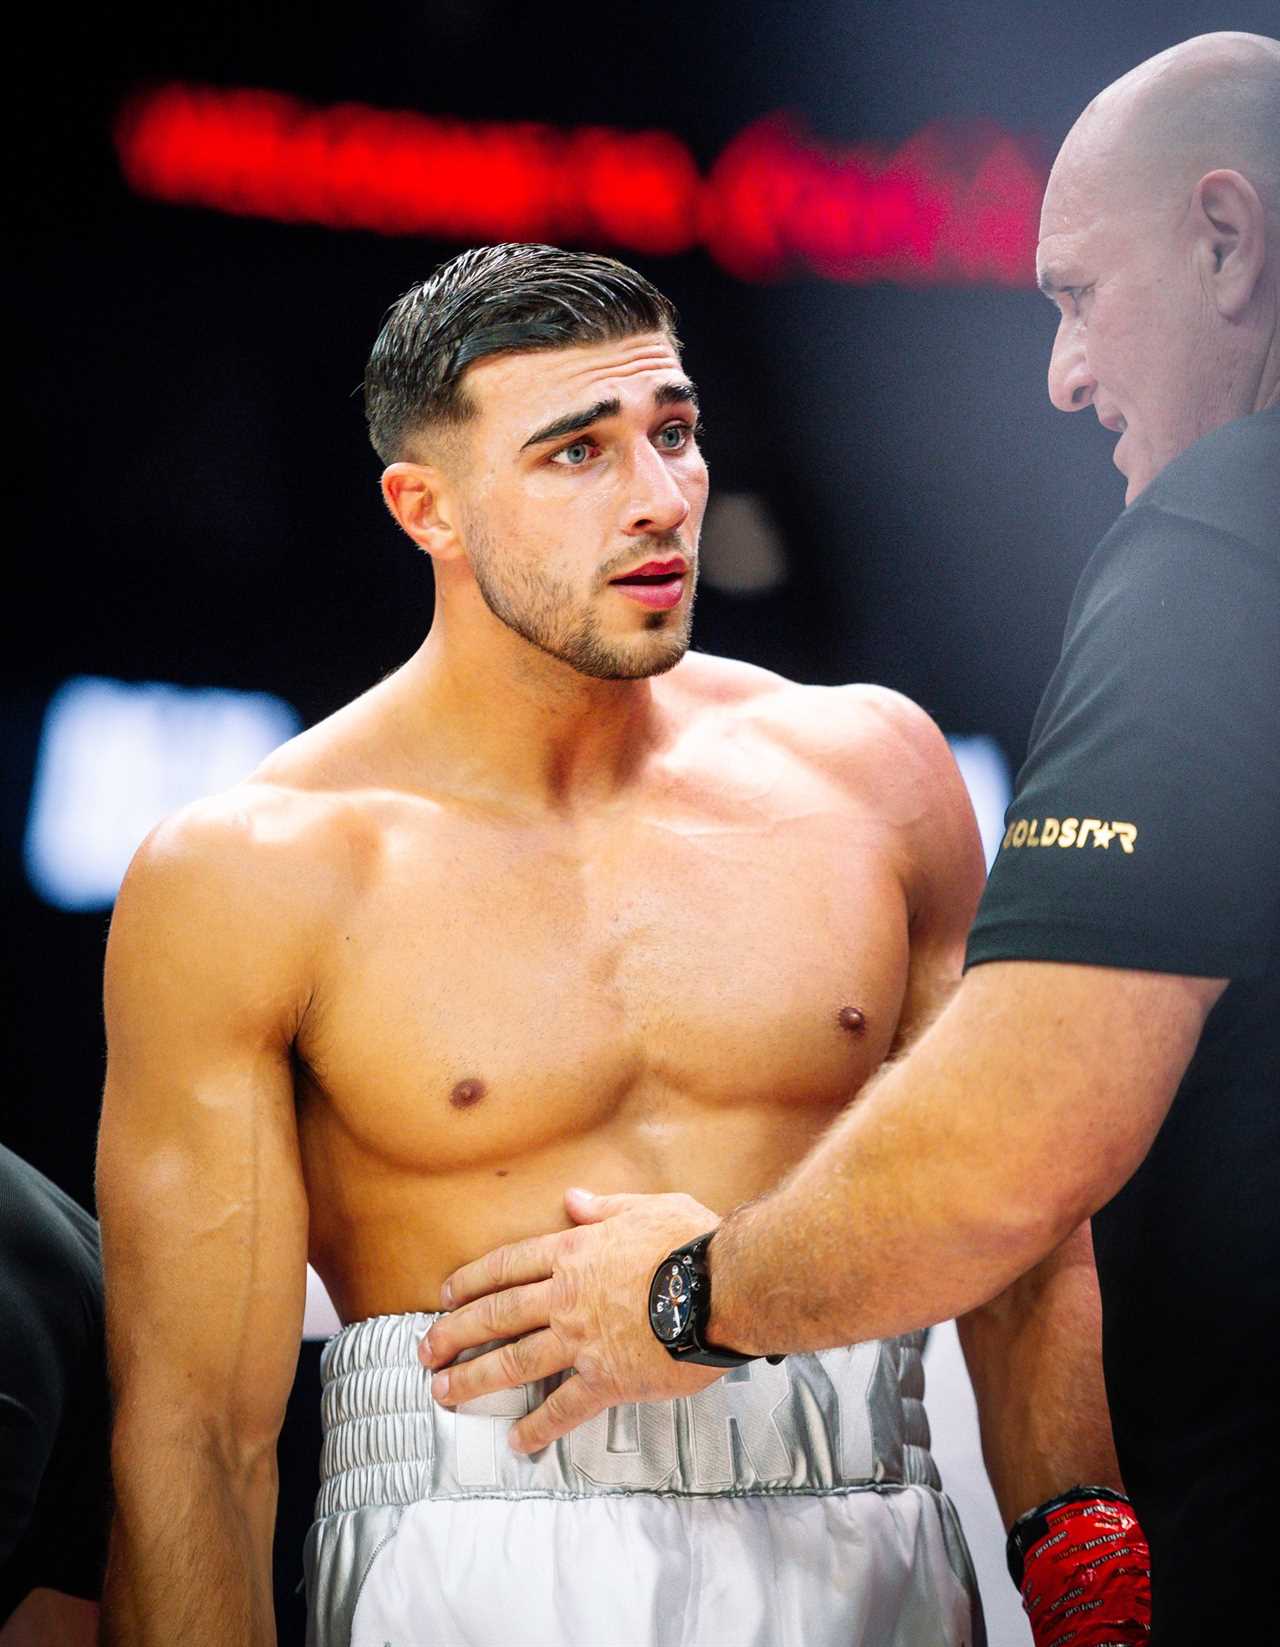 I'm glad that I wasn't there - Tommy Fury's promoter criticizes Jake Paul's'silly, ridiculous' antics at the fight in Dubai